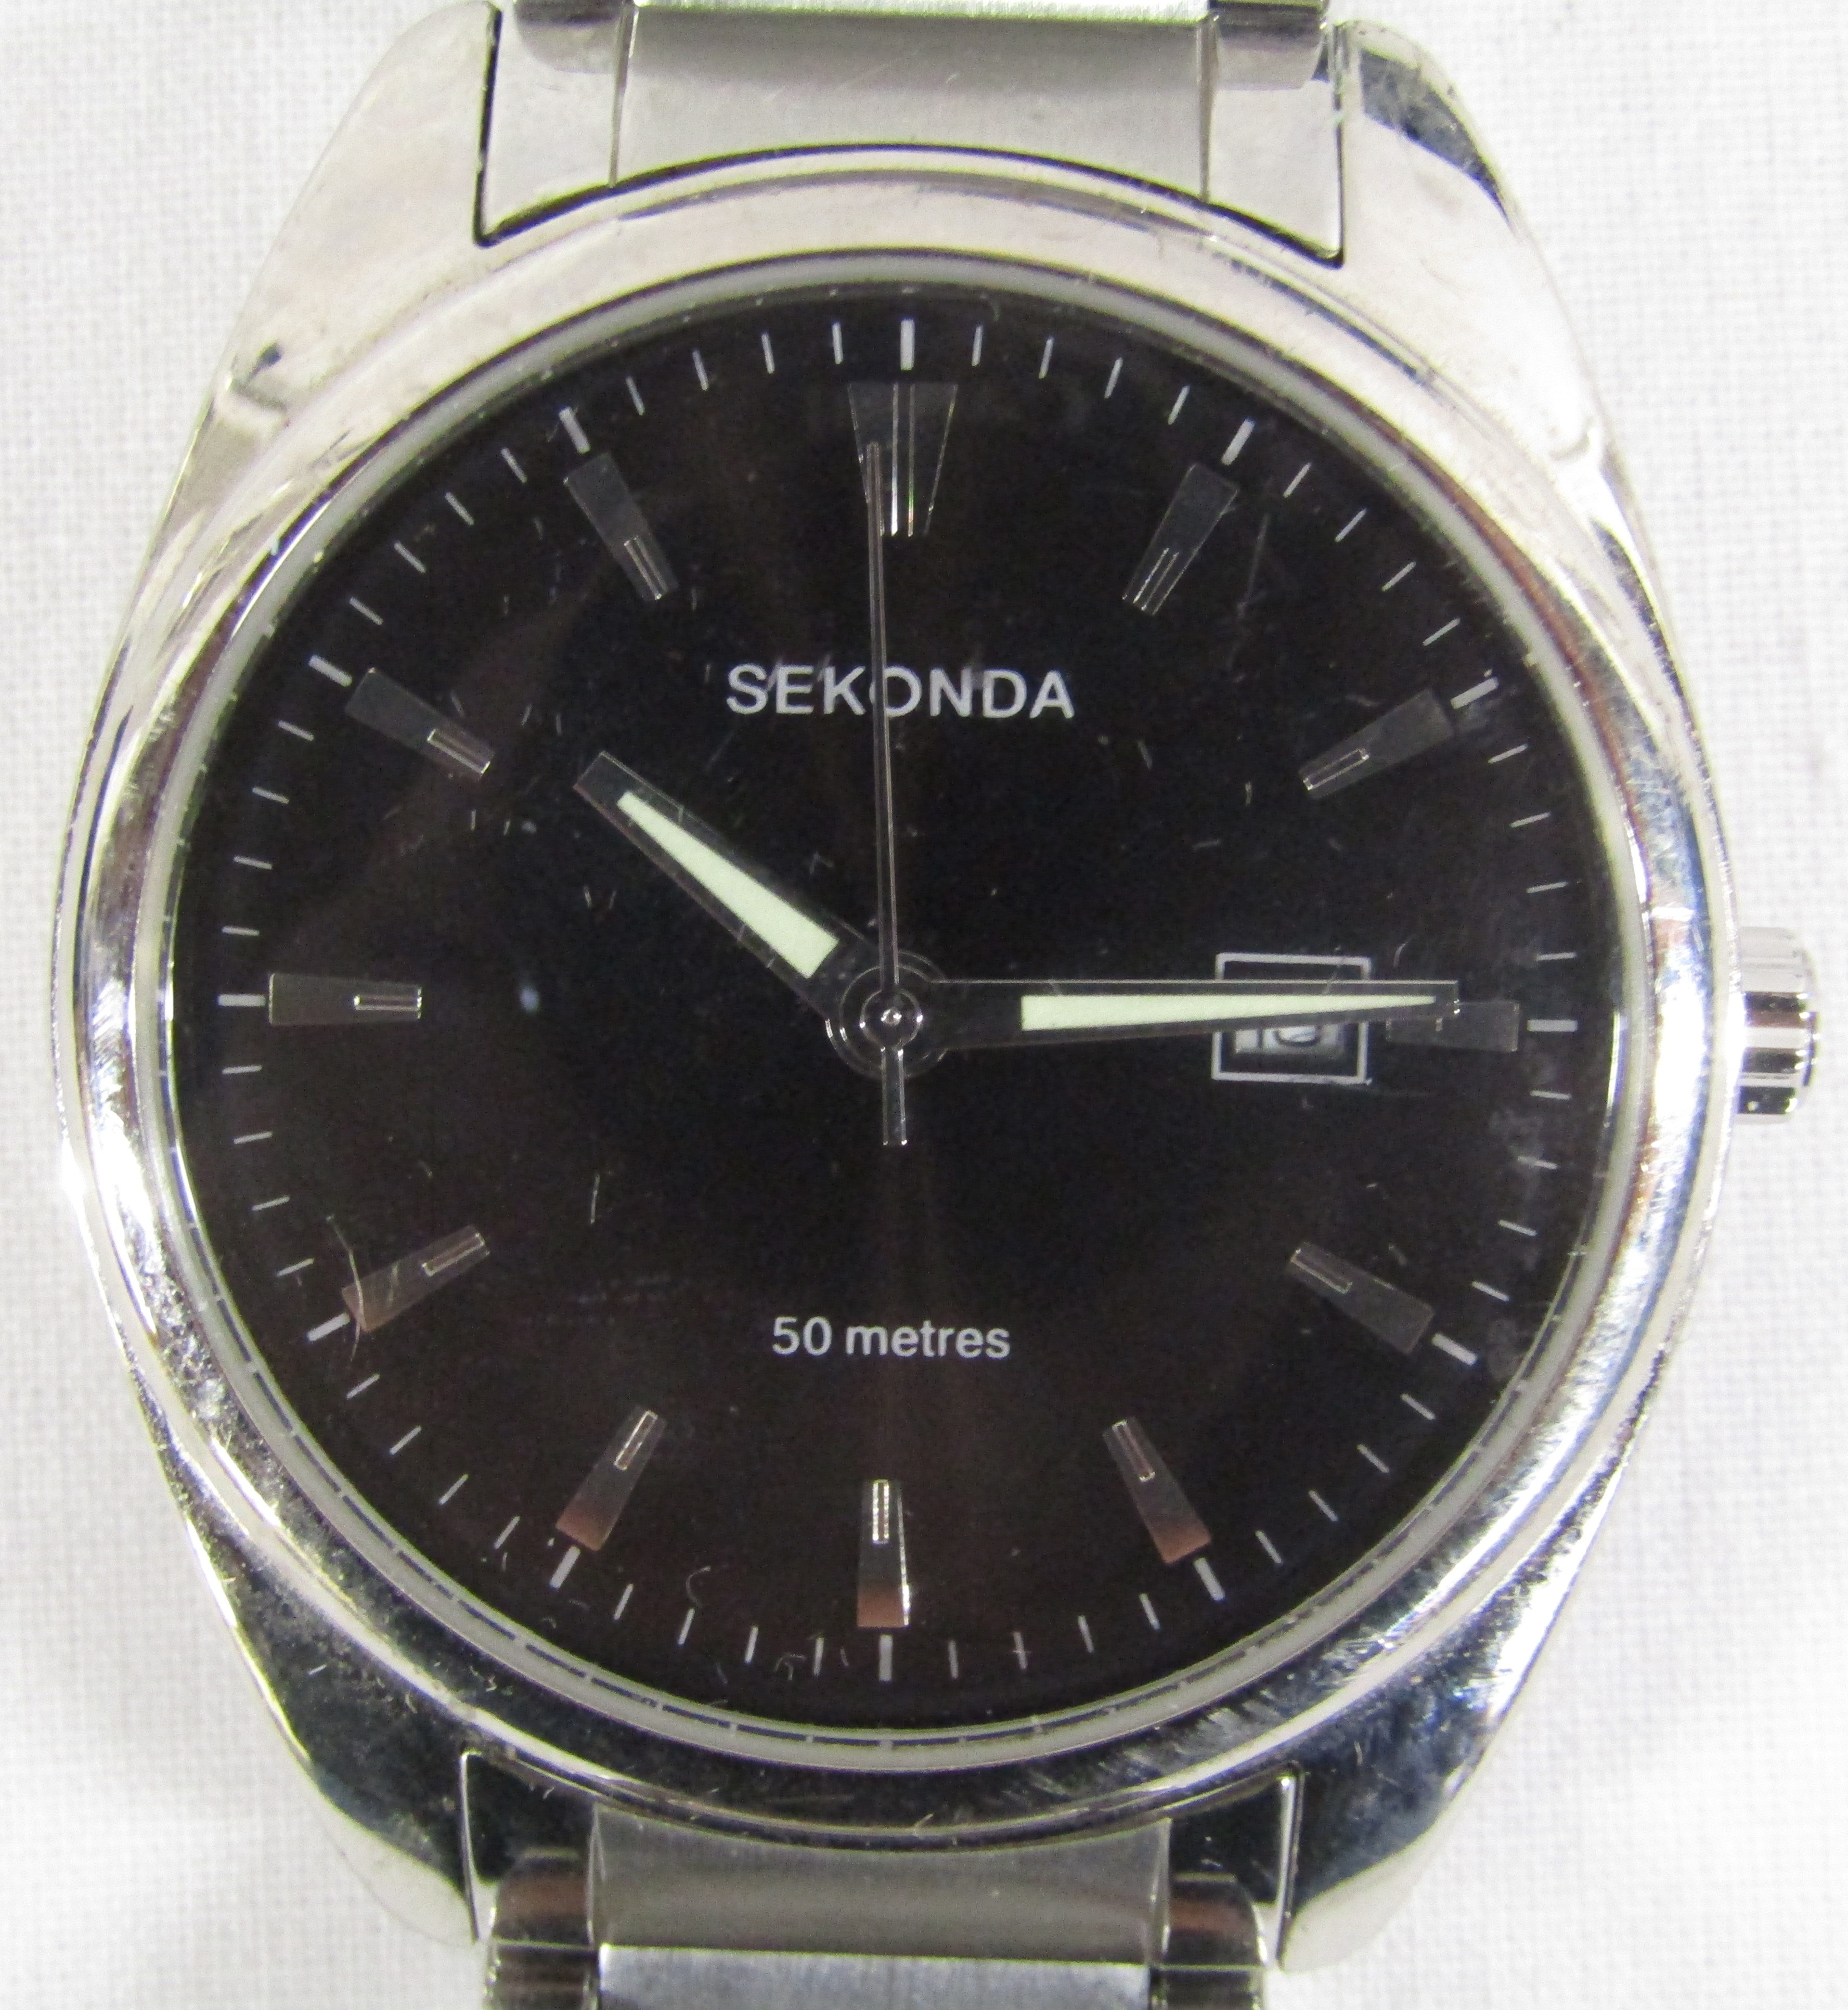 6 men's Sekonda watches - 1525 digital, 03405 with date, 3846 with date, 3407H chronograph, N3490 - Image 6 of 13